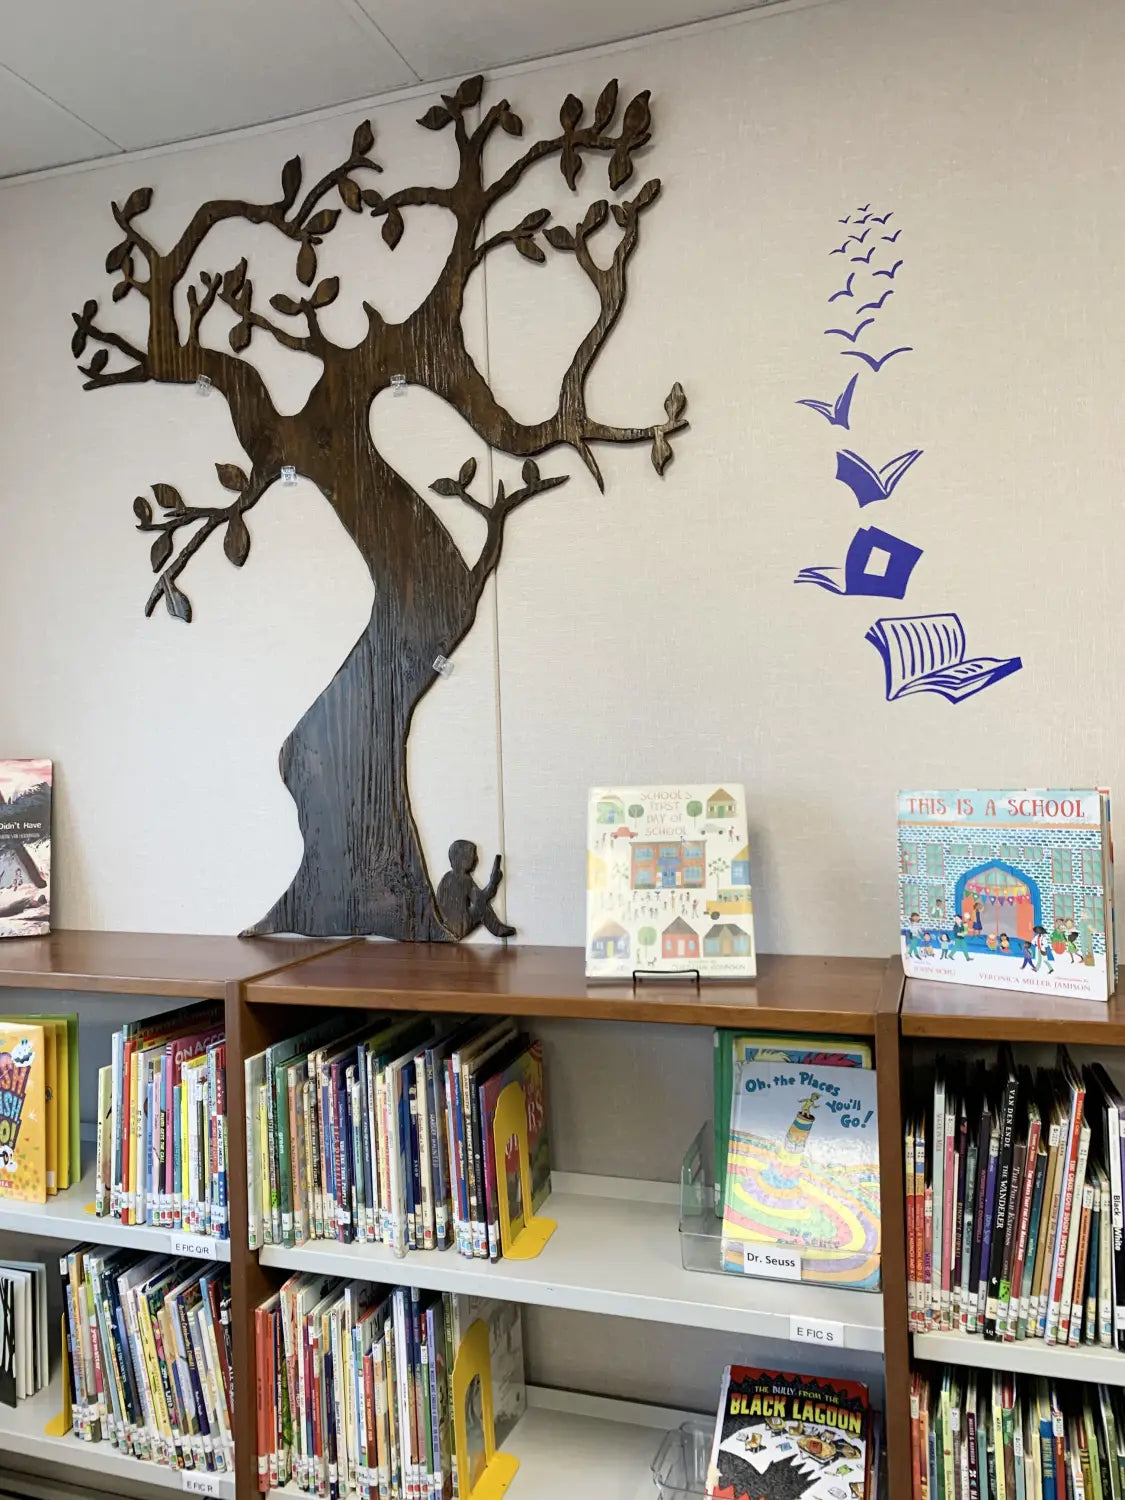 School library wall adorned with a vinyl decal of an open book transforming into flying birds, symbolizing the transformative power of reading.